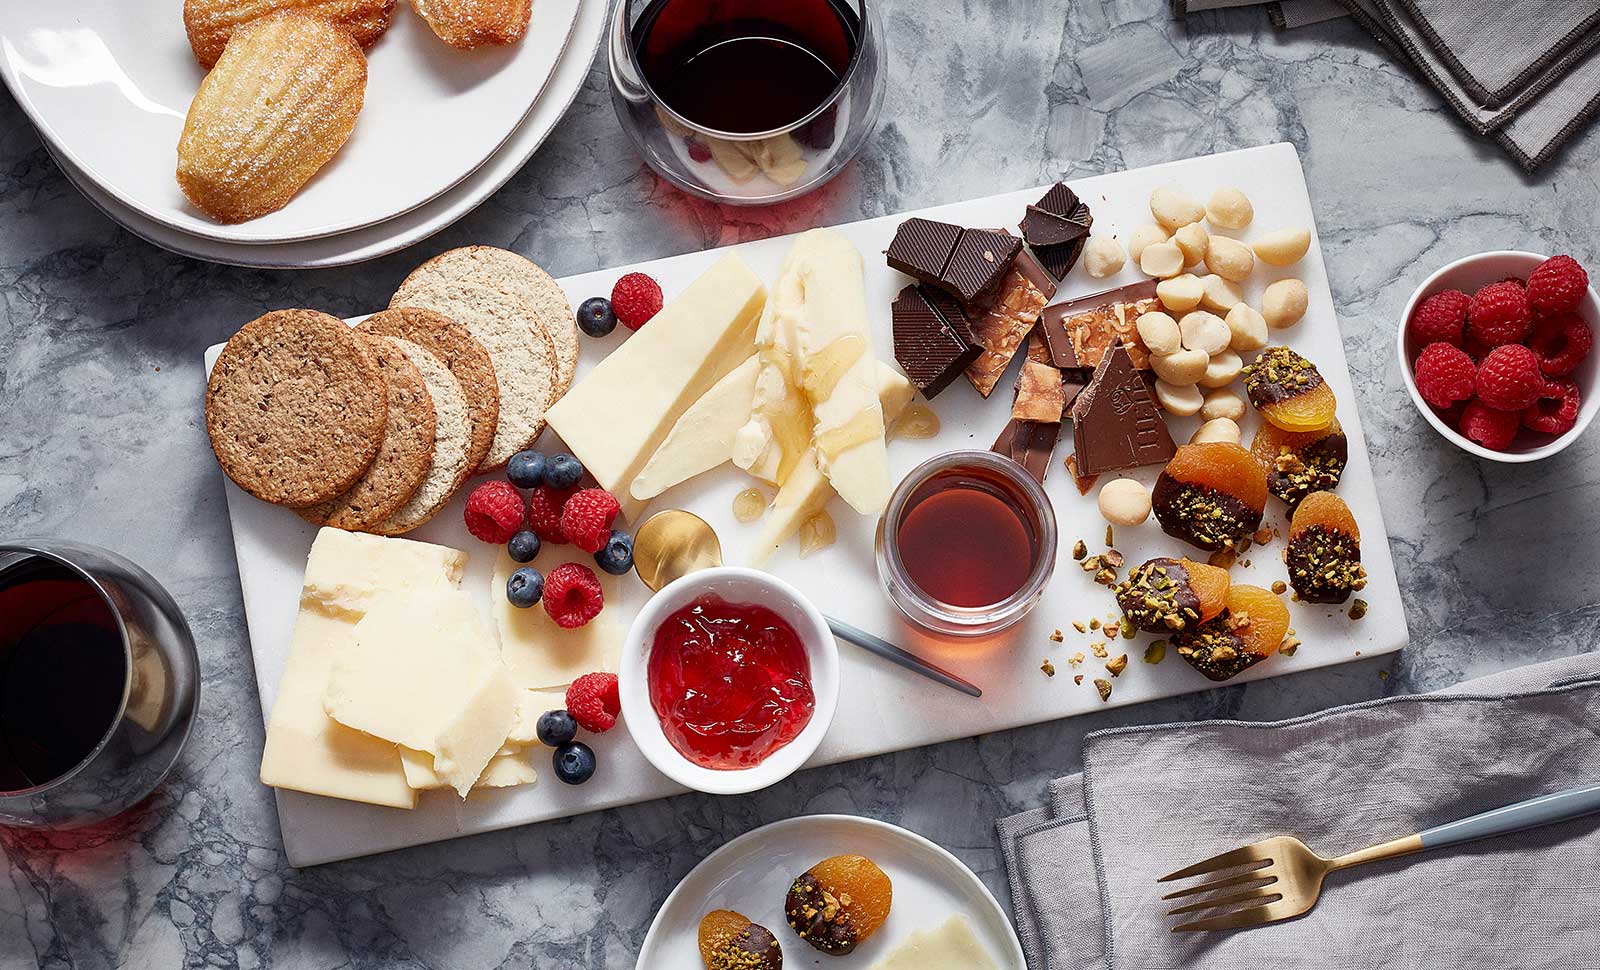 A charcuterie dessert board filled with slices of cheddar cheese, dark chocolate, nuts, jam, blueberries, raspberries and crackers.